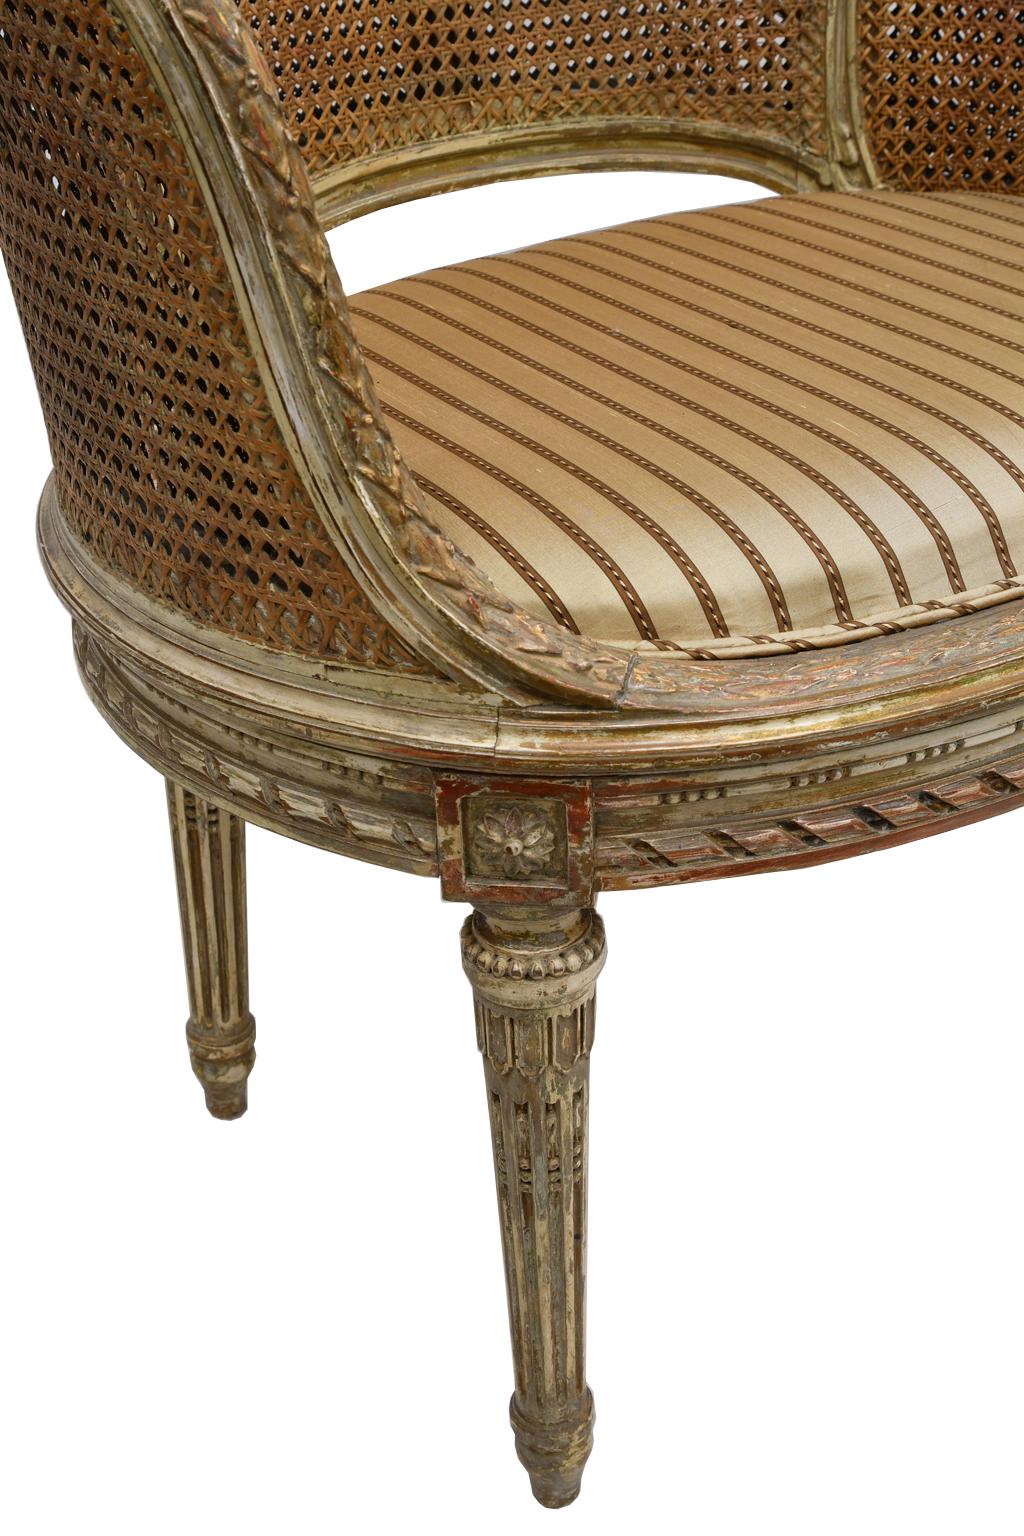 Antique French Louis XVI Style Polychrome and Gilt Barrel Desk Chair with Caning 6